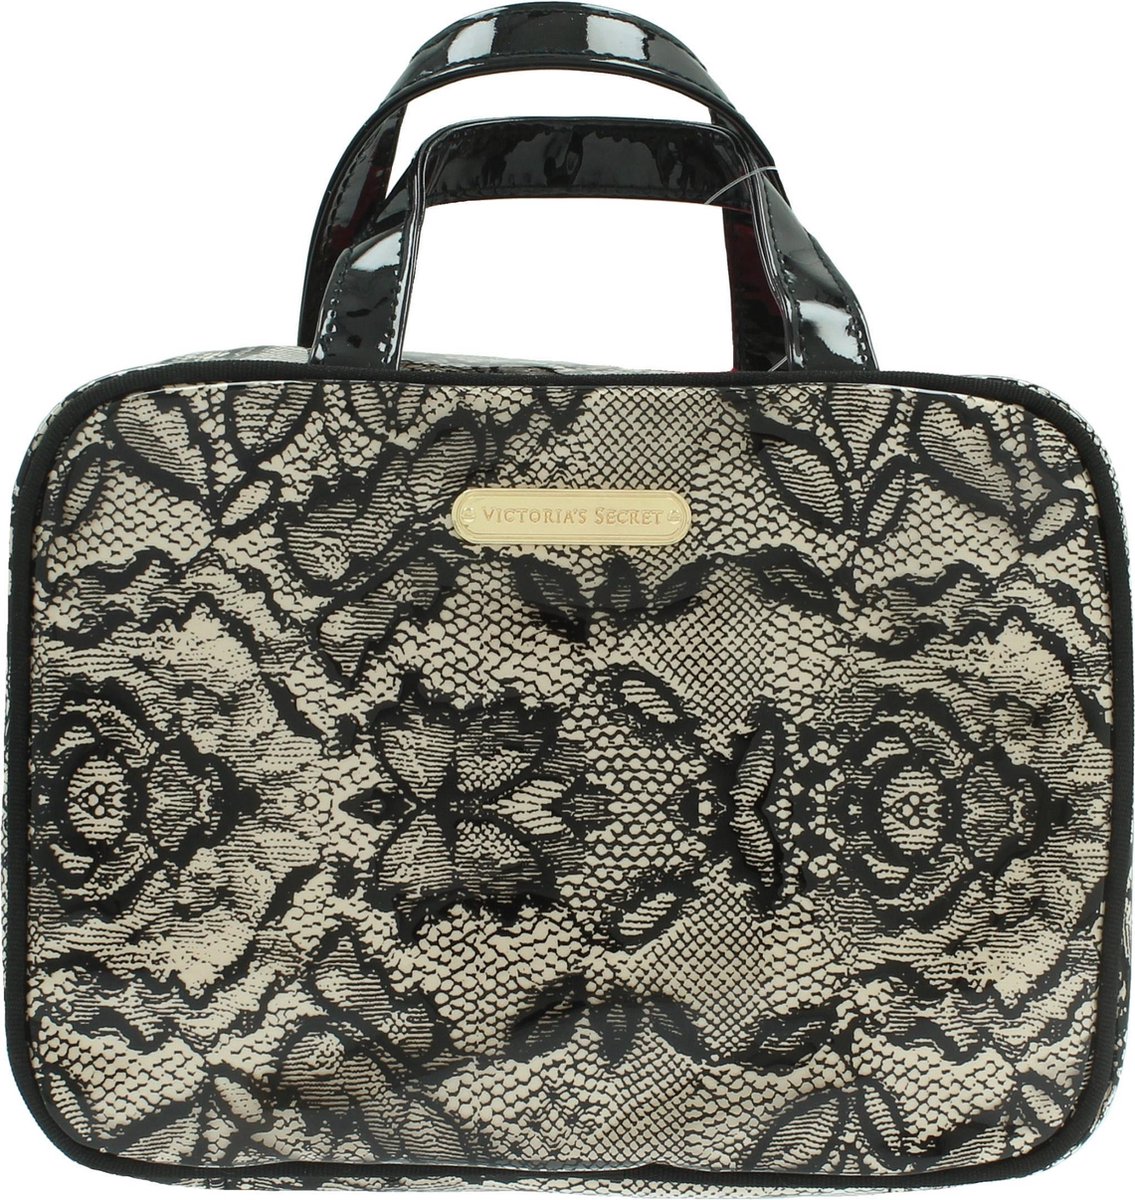 Albany Begrafenis Figuur Victoria's Secret Small Hanging Weekender Black Lace Over Nude | bol.com